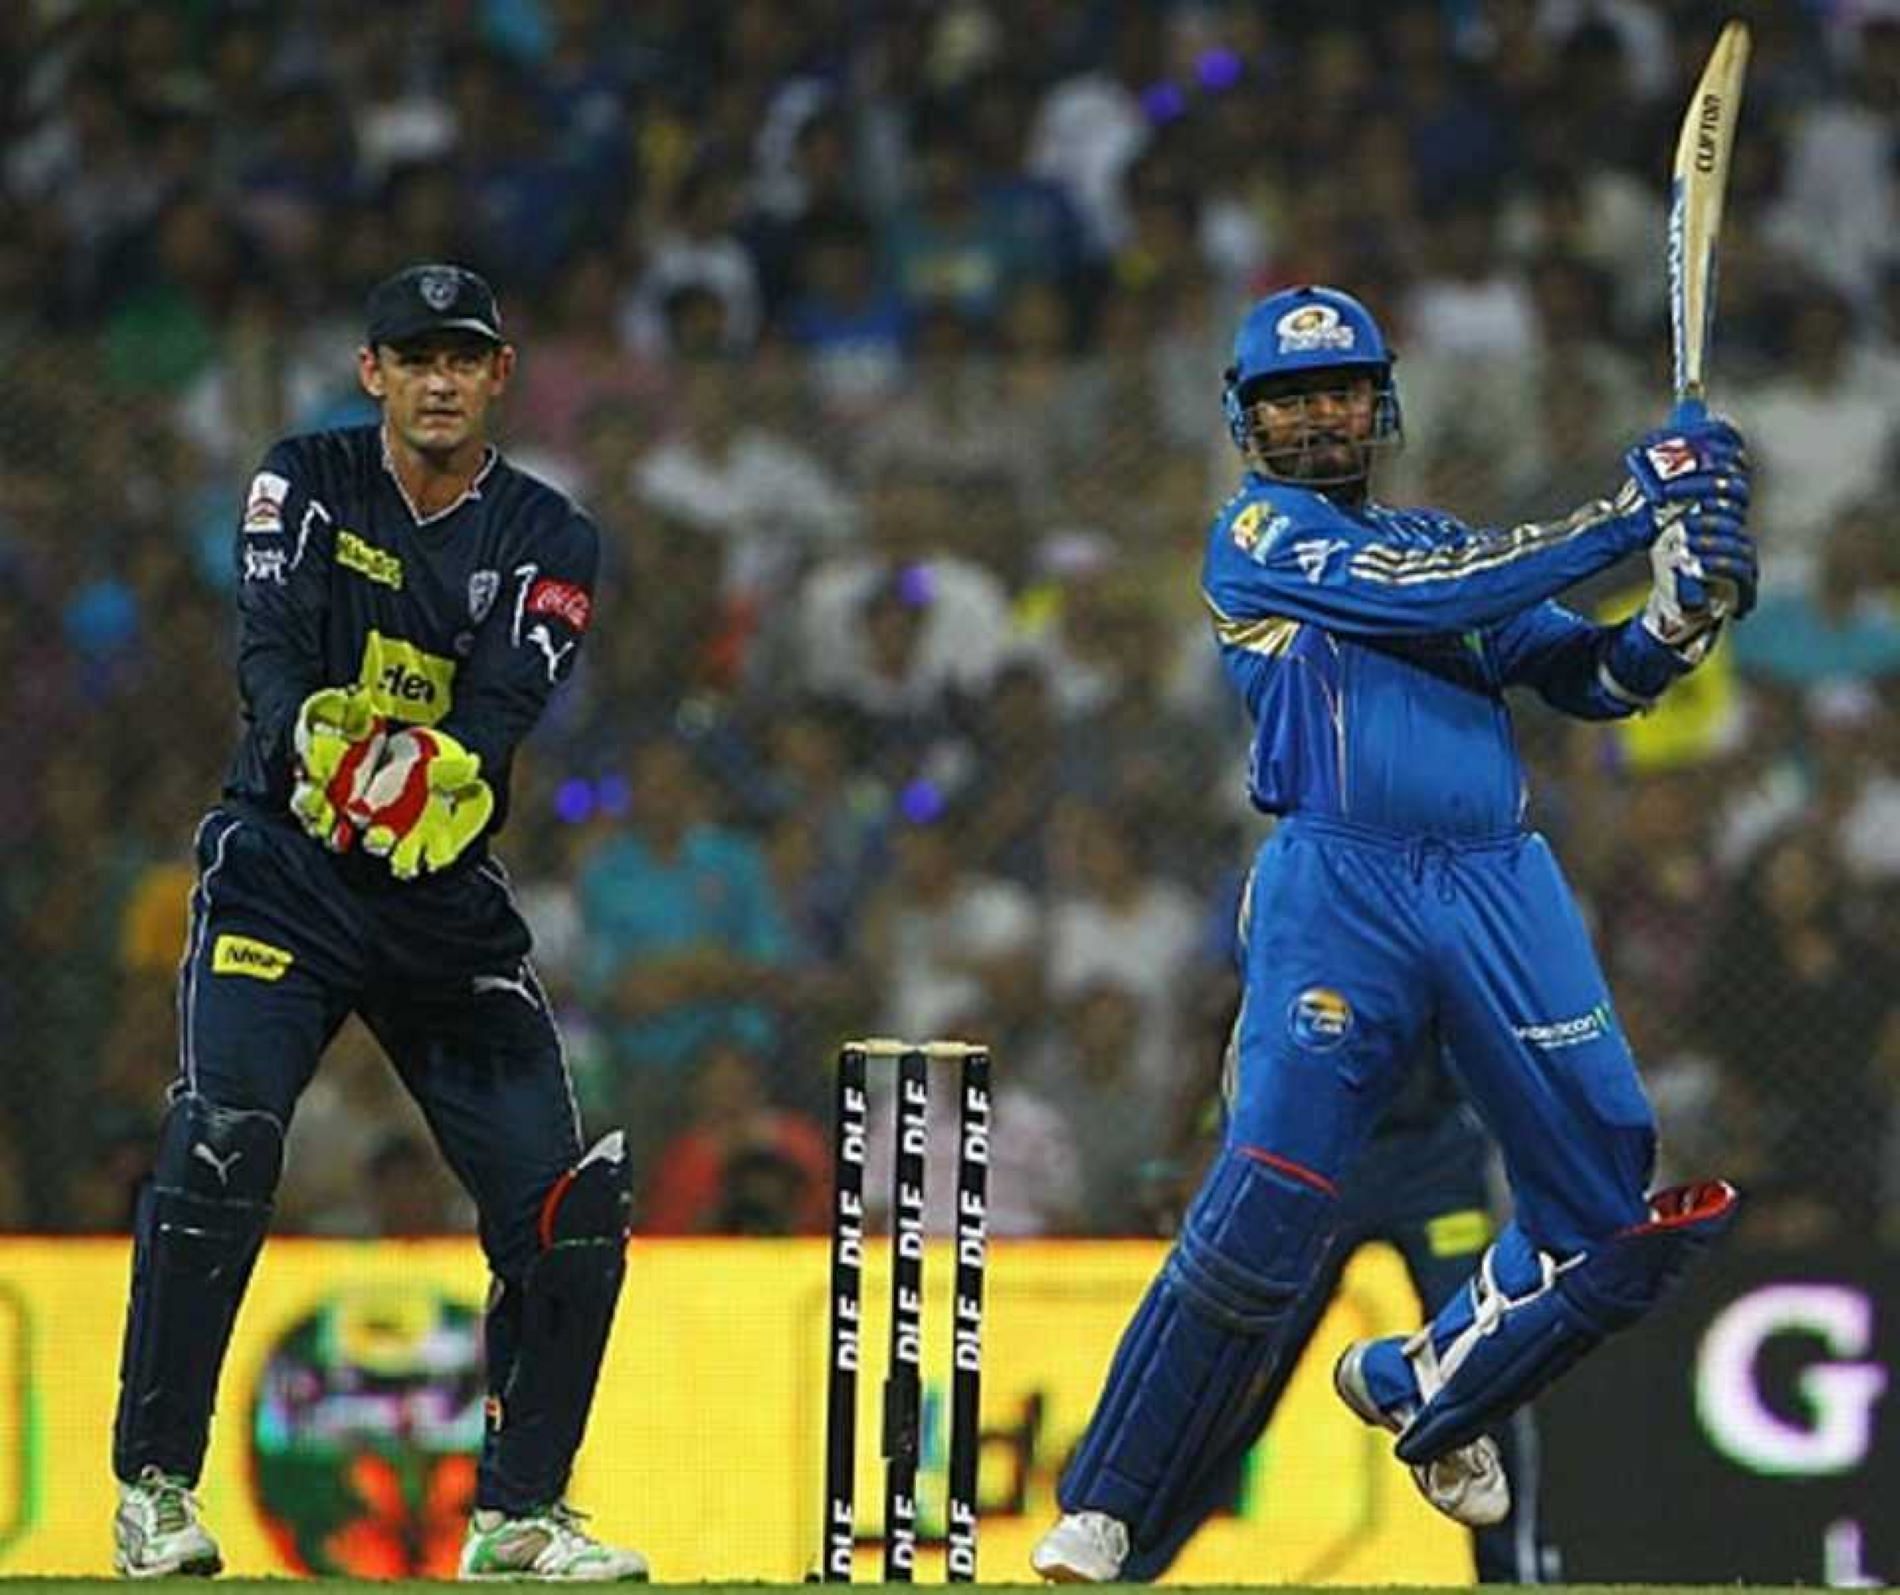 Harbhajan stunned the Deccan Chargers with his knock of 49